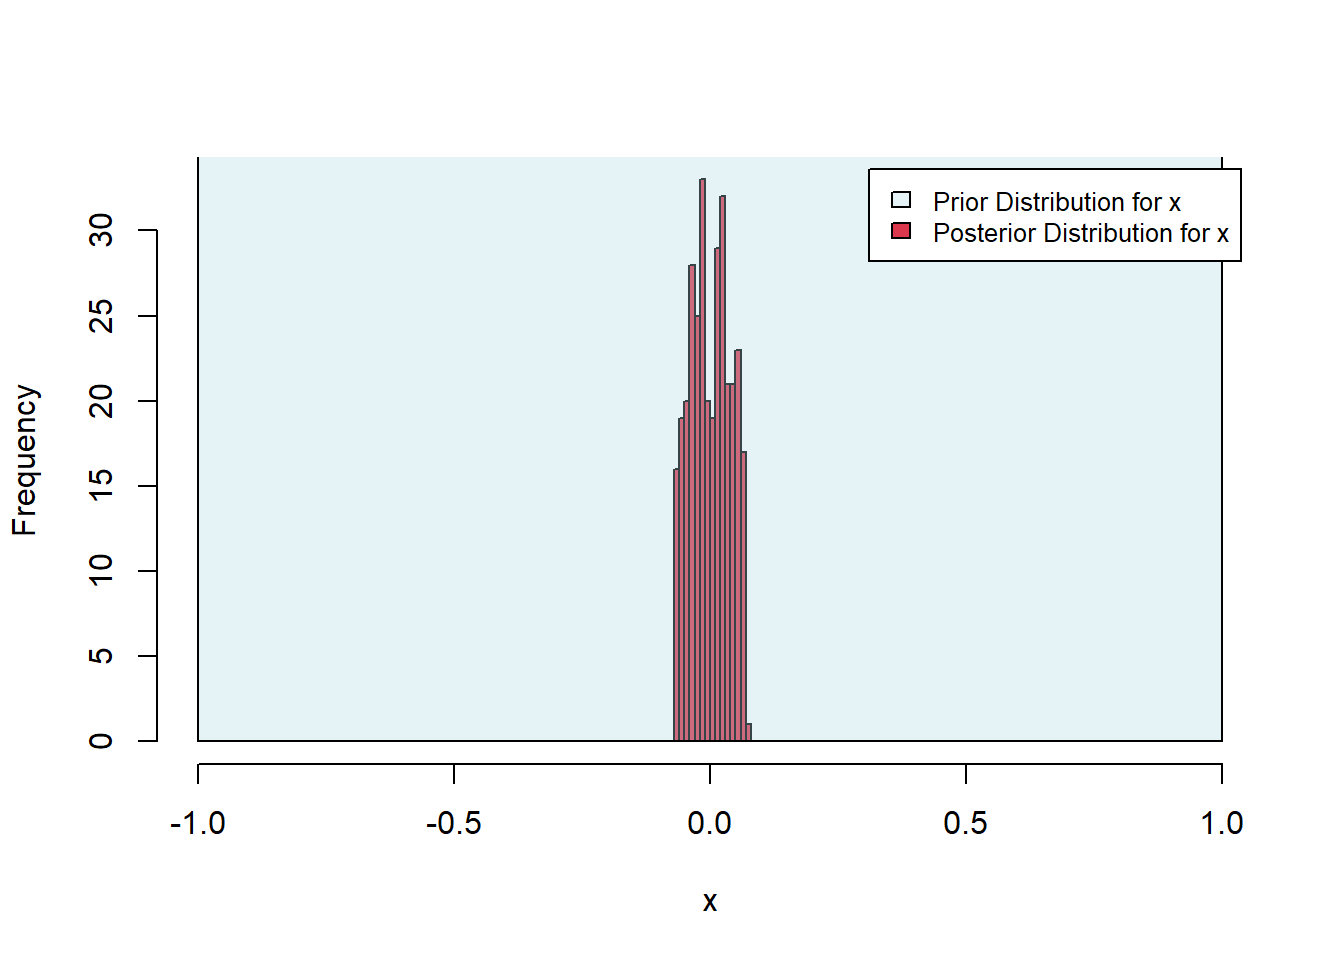 These figures show histograms that show very small bars for the x-distribution and wider spread bars for the y-distribution.